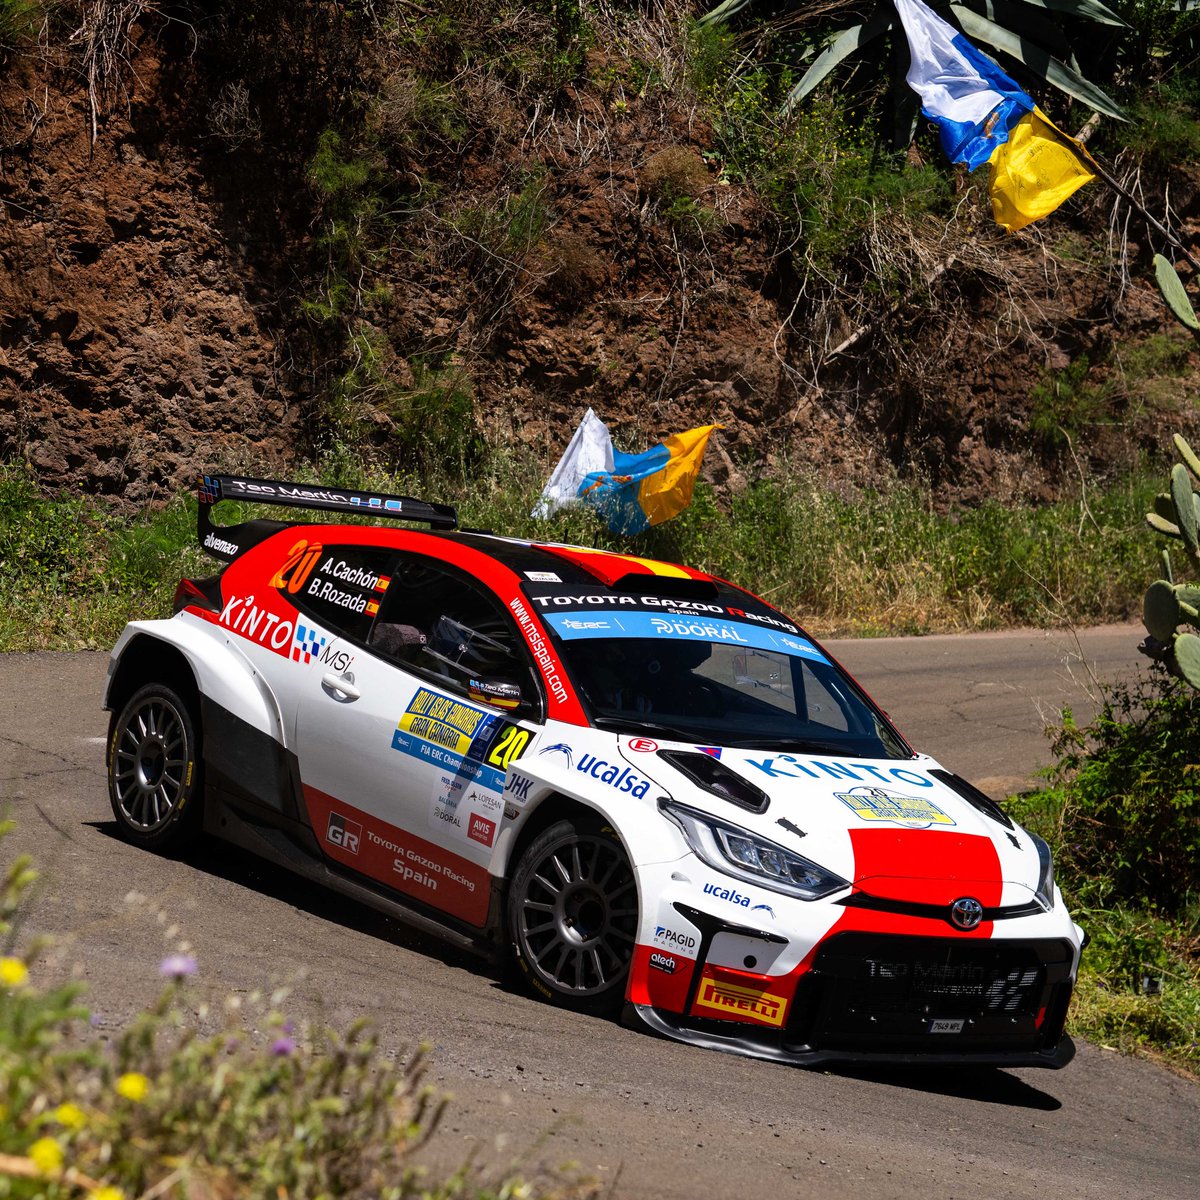 A first #FIAERC 🇪🇺 podium 🥉 and #SCER 🇪🇸 victory! 🏆 

Fantastic fightback for @Cachon_Ale at #RallyIslasCanarias 🇮🇨👏

#ToyotaGAZOORacing #GRYarisRally2